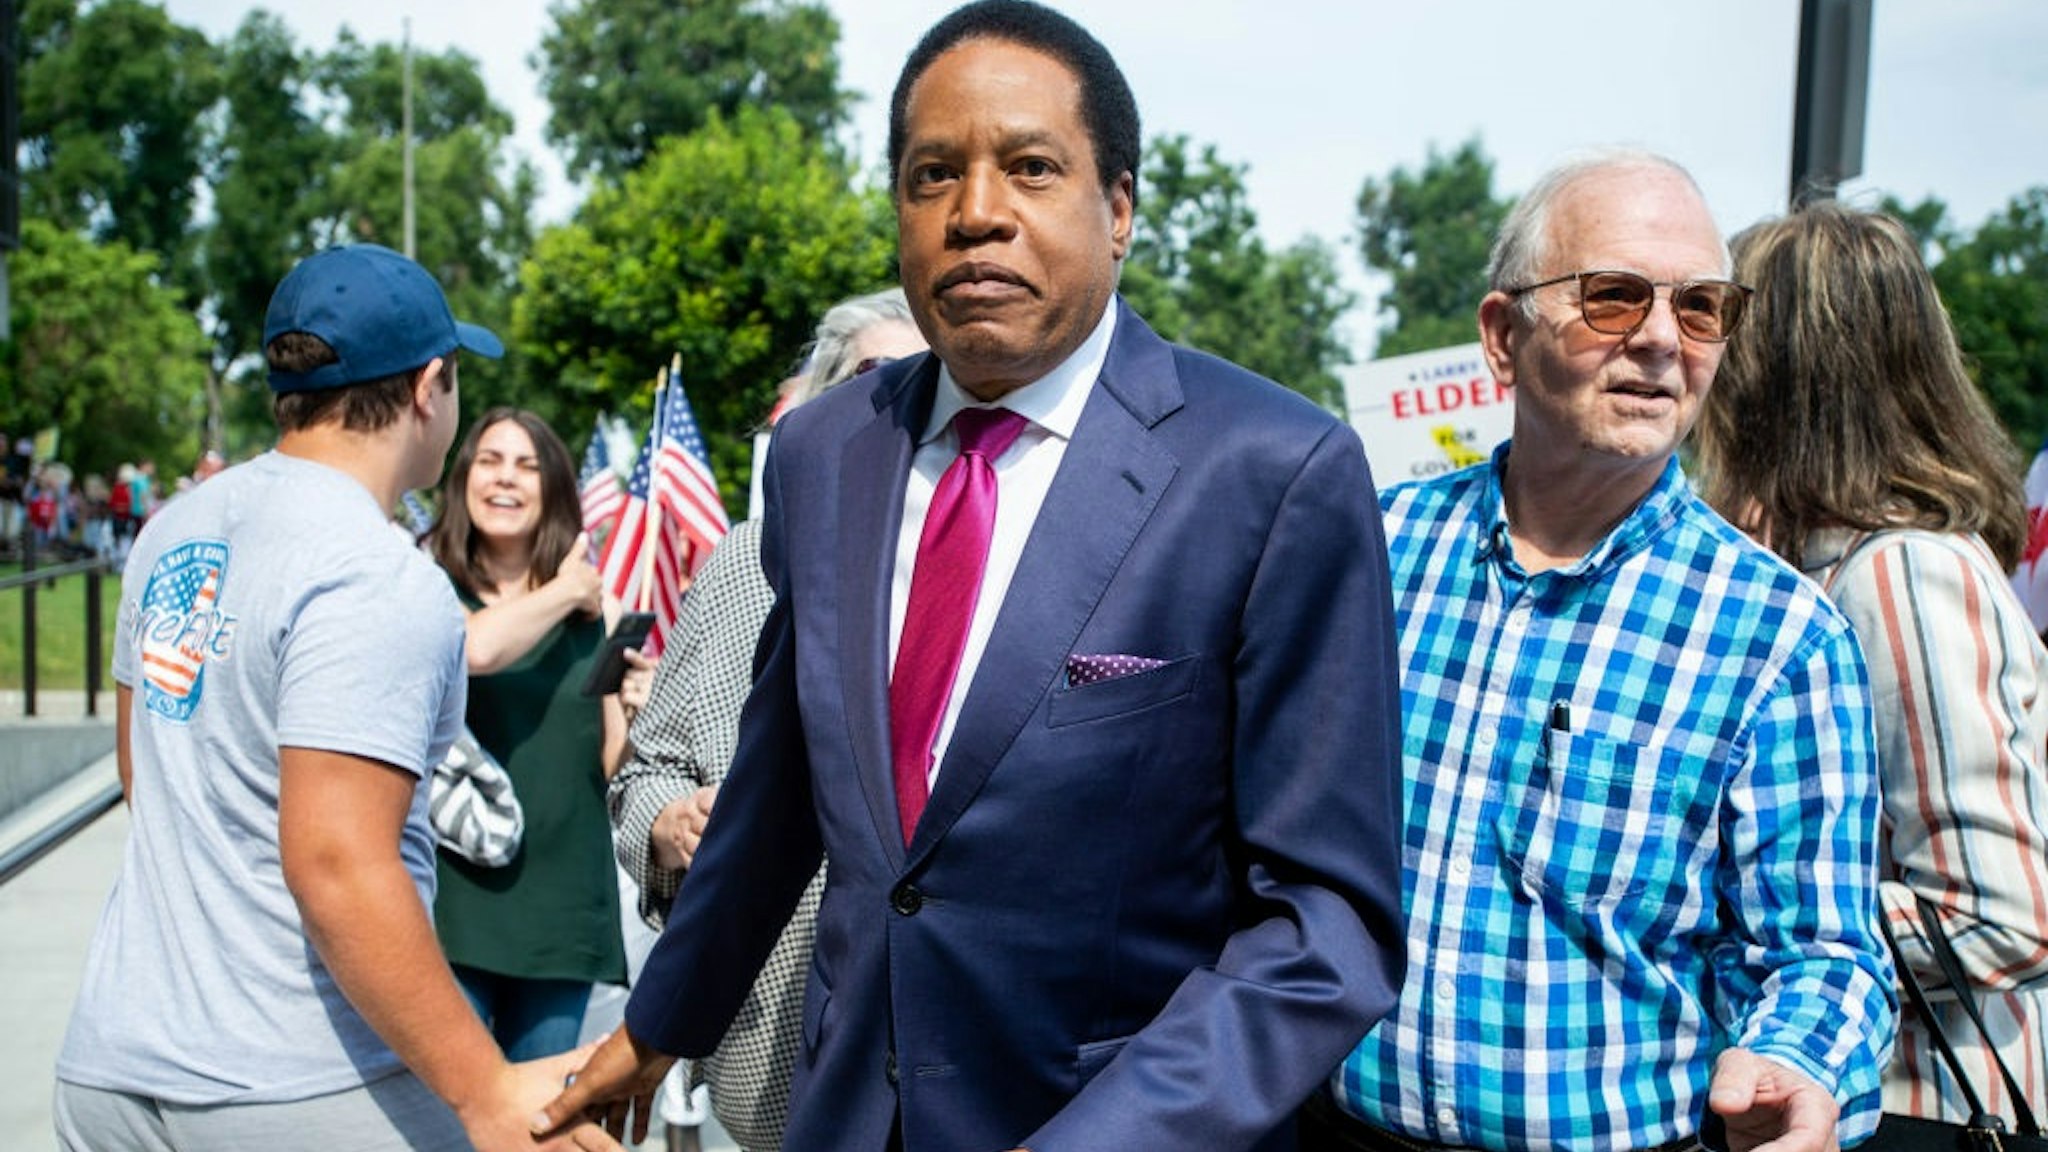 Norwalk, CA - July 13 Larry Elder arrives at the Norwalk Registrar of Voters on Tuesday, July 13, 2021 to file paperwork announcing his run for governor in the California recall election.